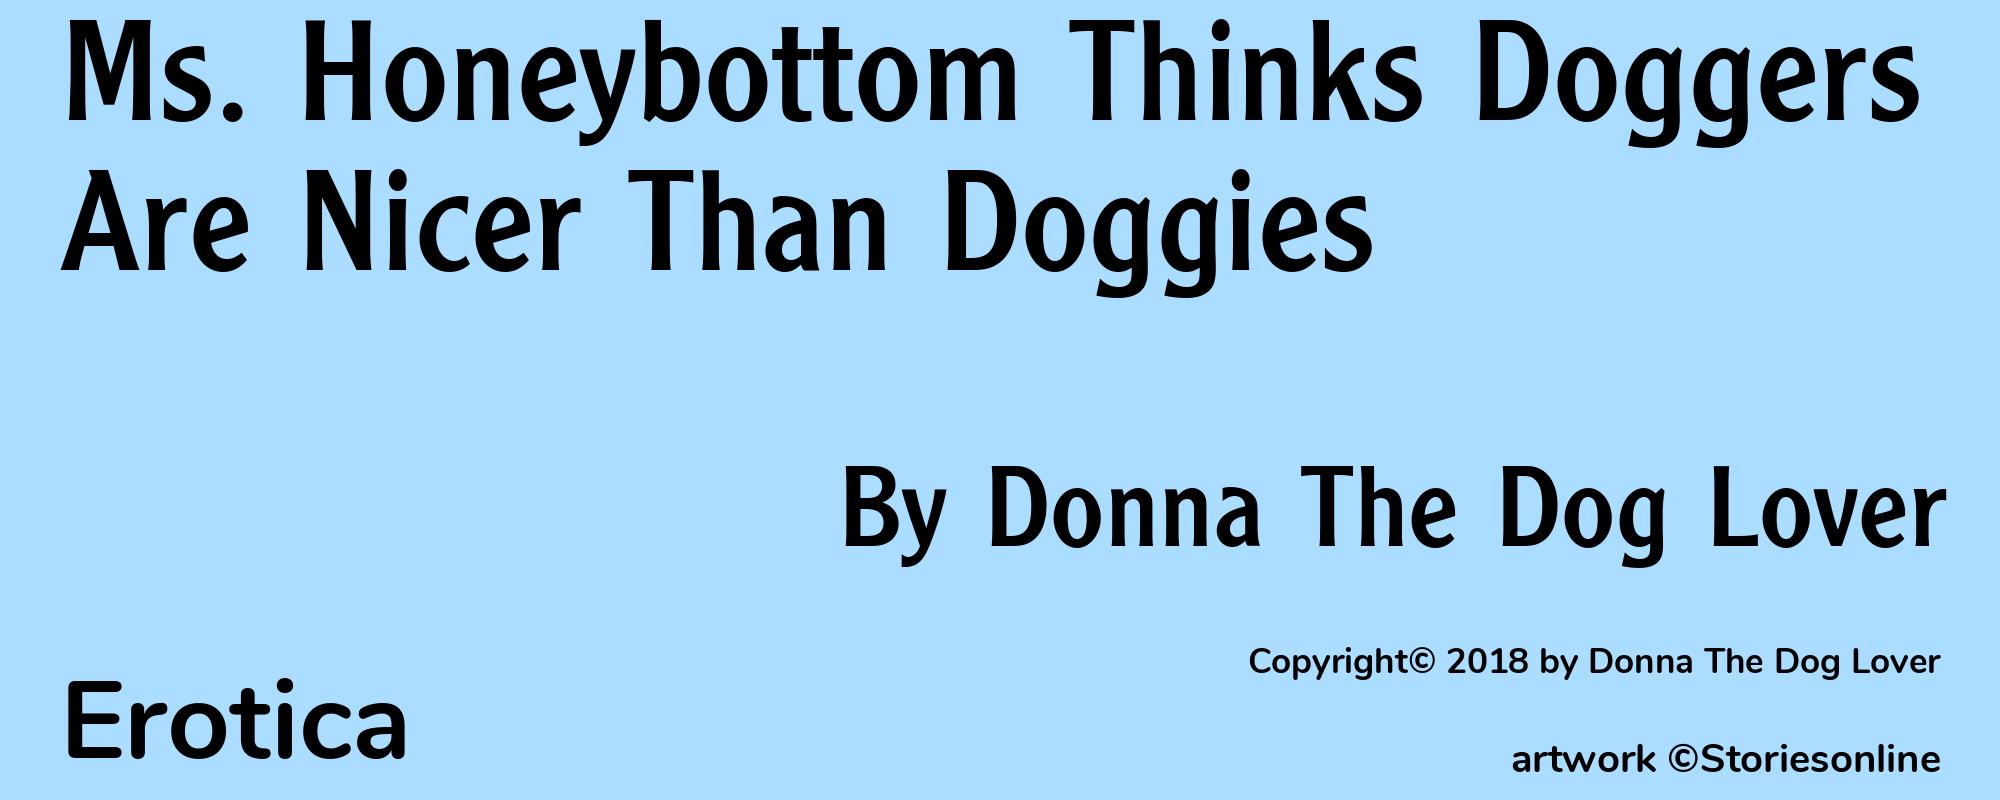 Ms. Honeybottom Thinks Doggers Are Nicer Than Doggies - Cover